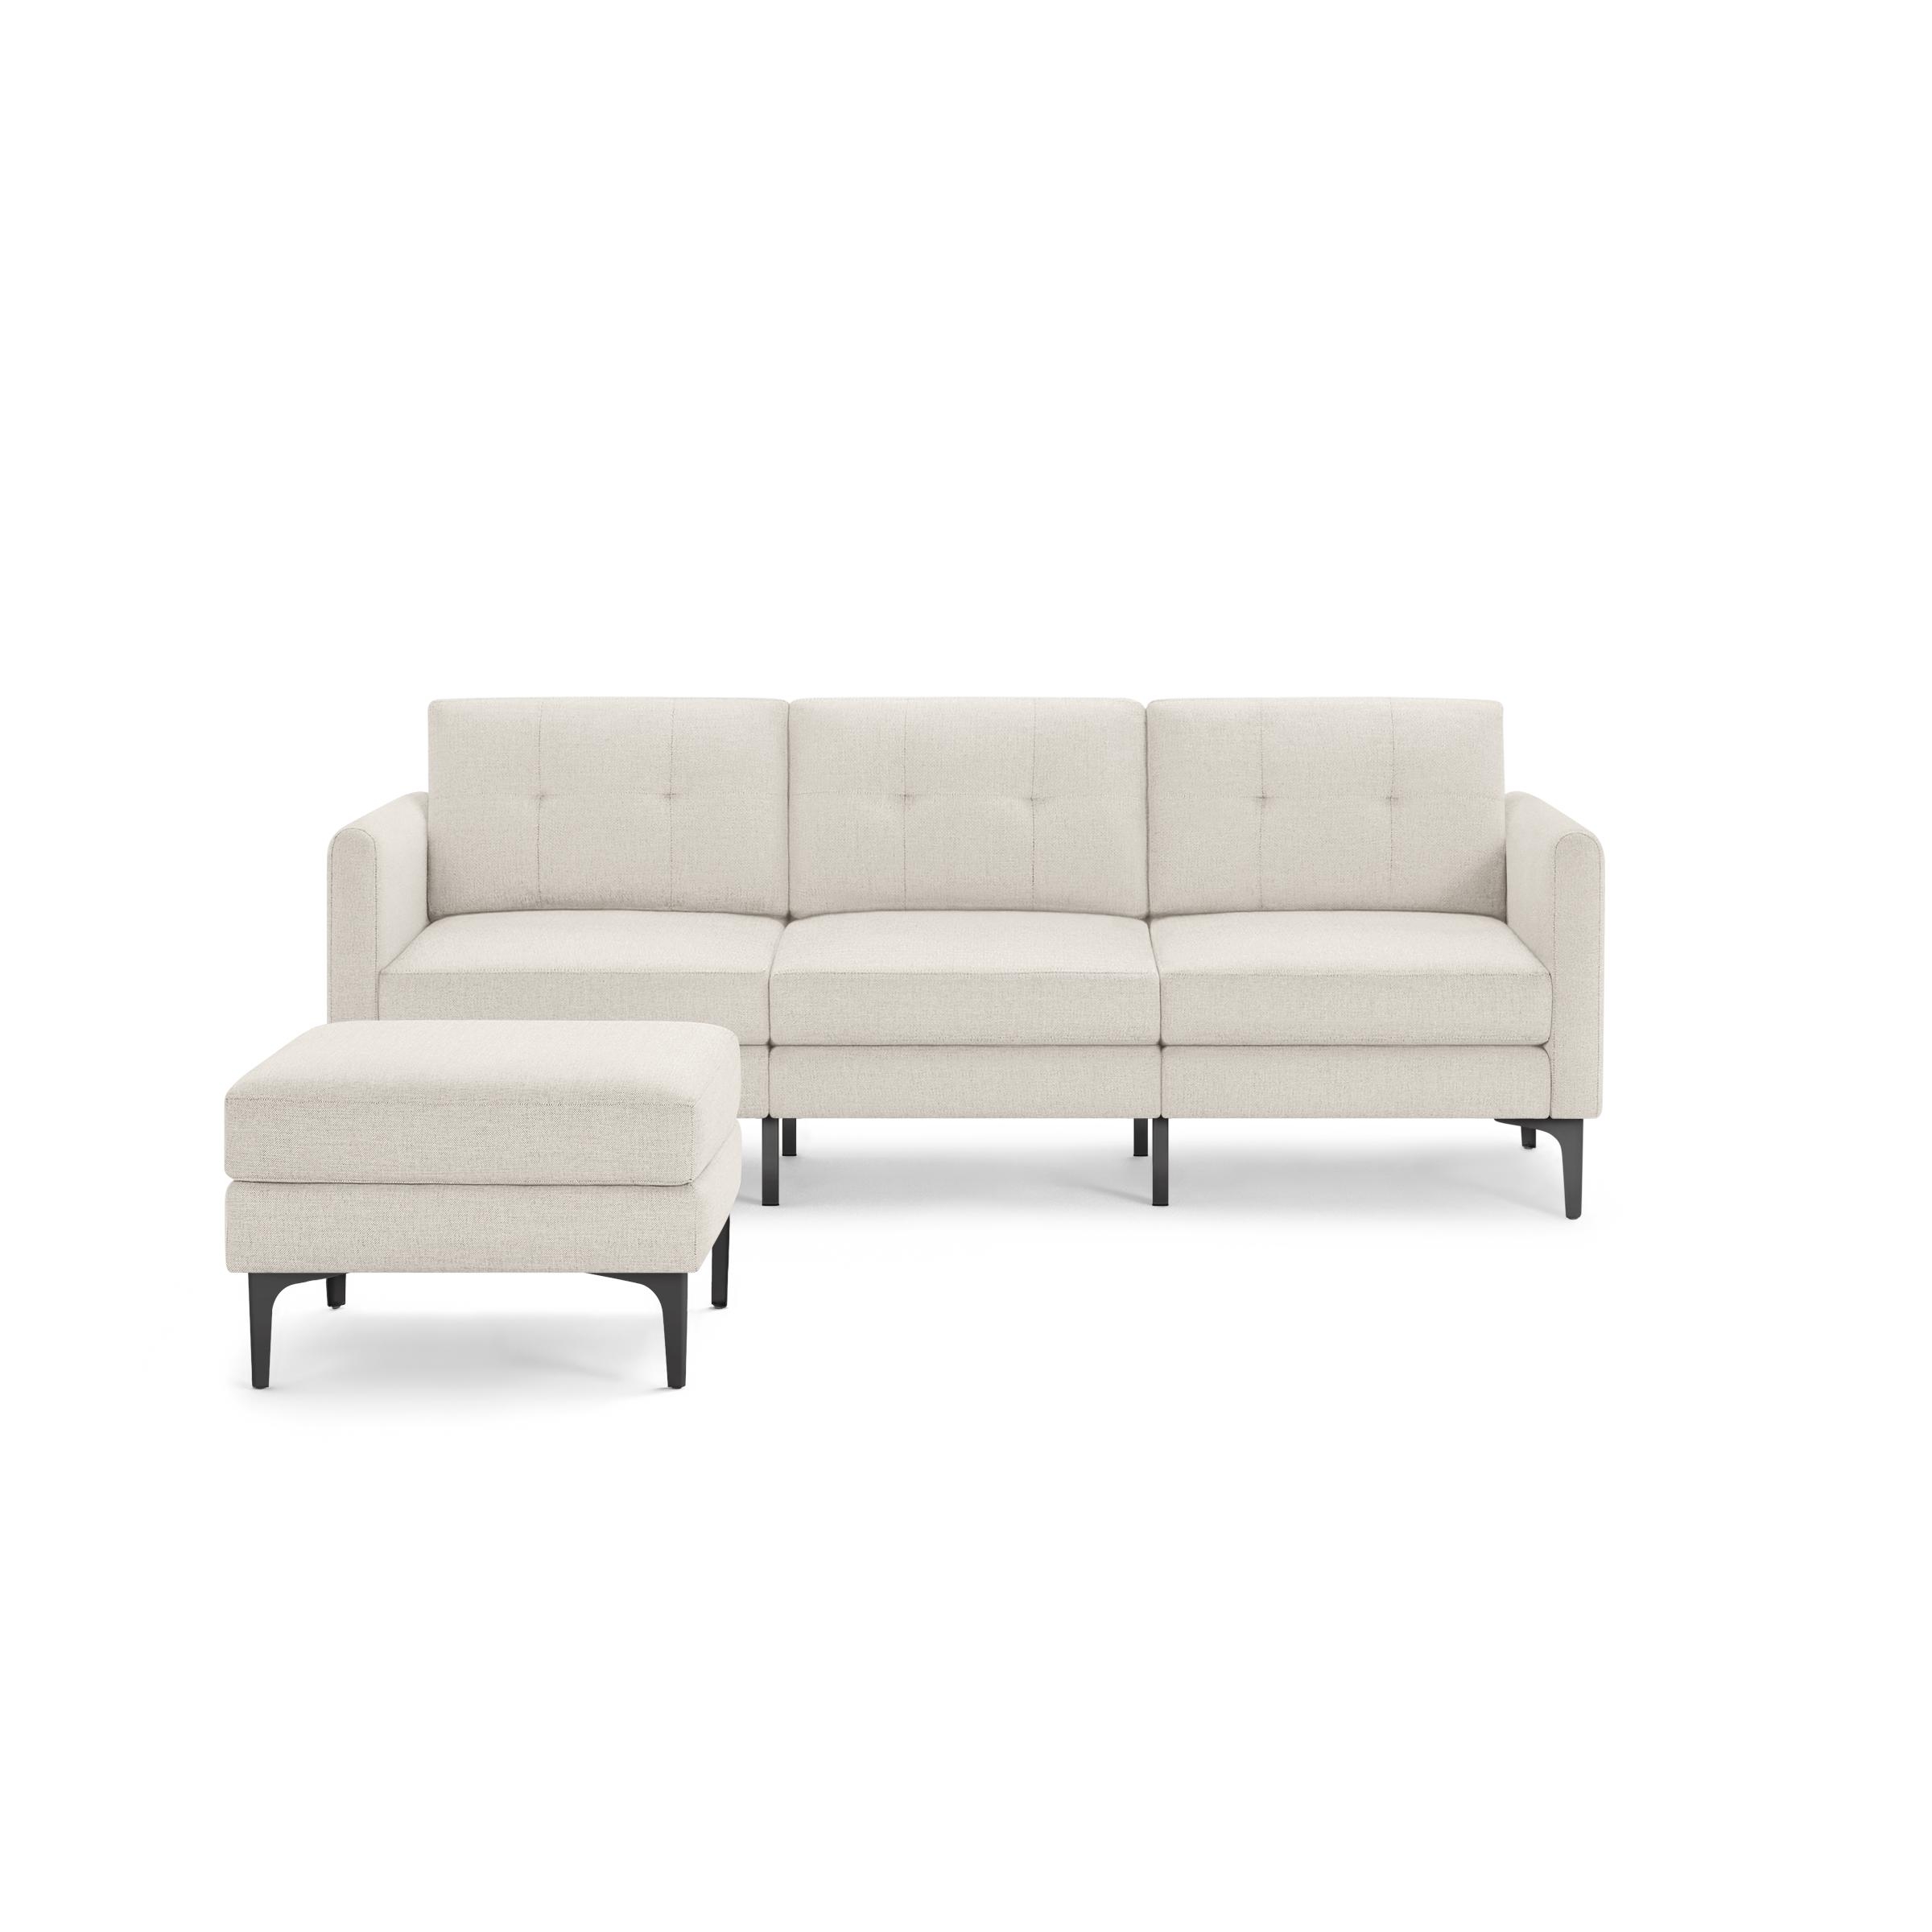 Nomad Sofa and Ottoman in Ivory, Black Metal Legs - Image 0